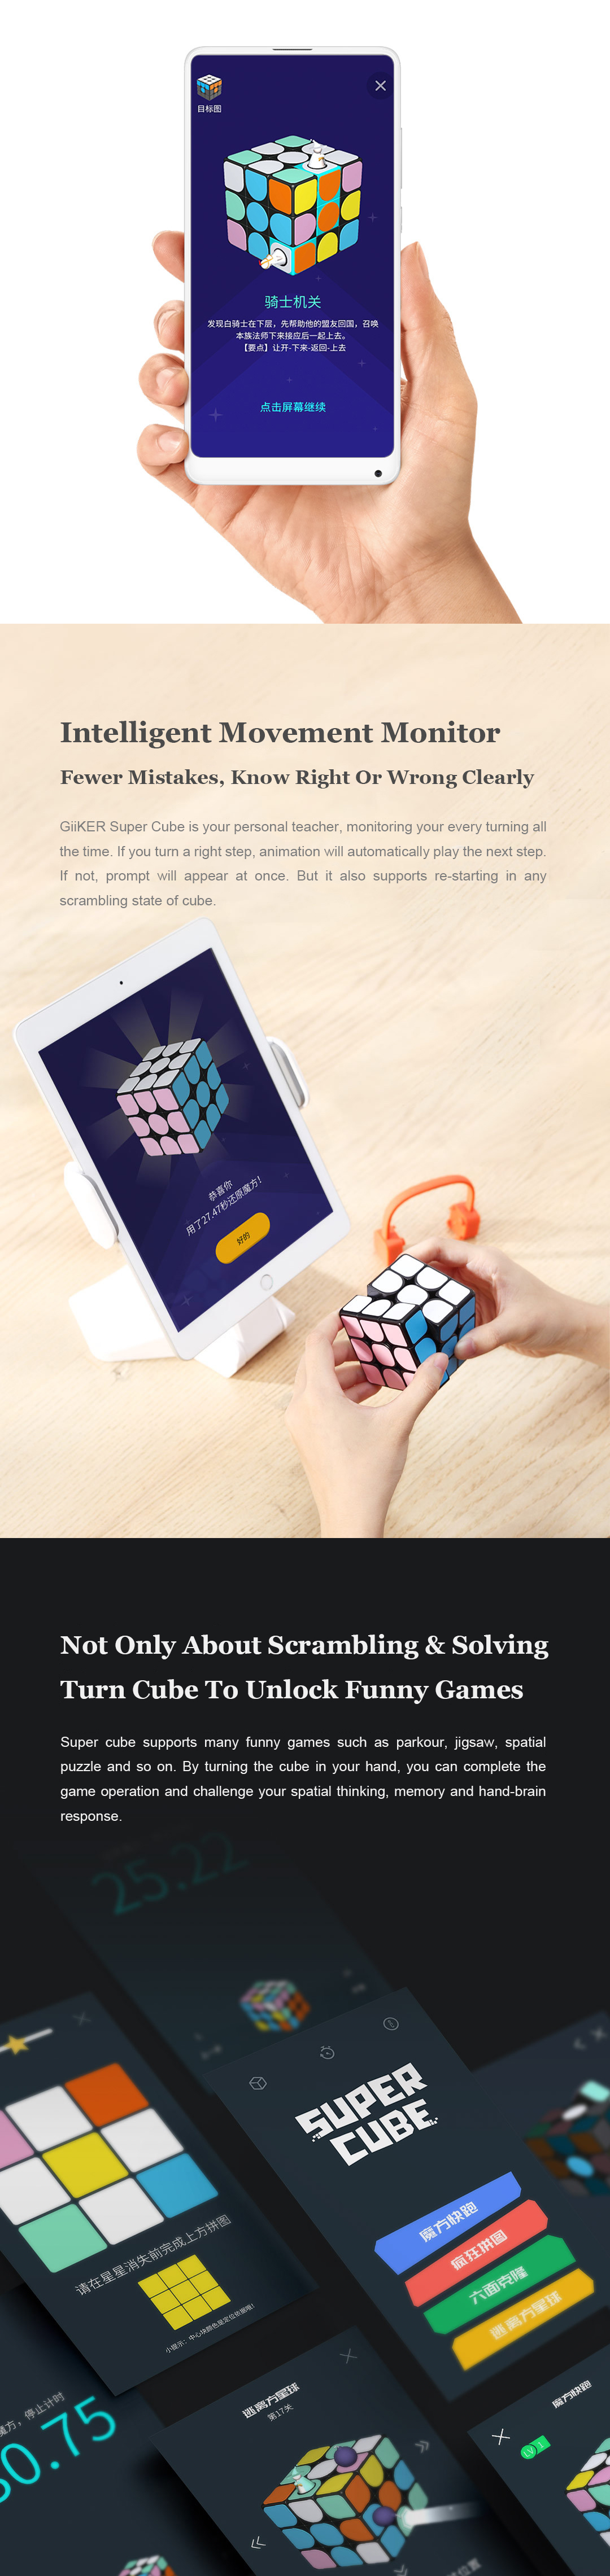 Xiaomi Giiker Super Square Magic Cube Smart App Real-time Synchronization Science Education Toy Gift 71